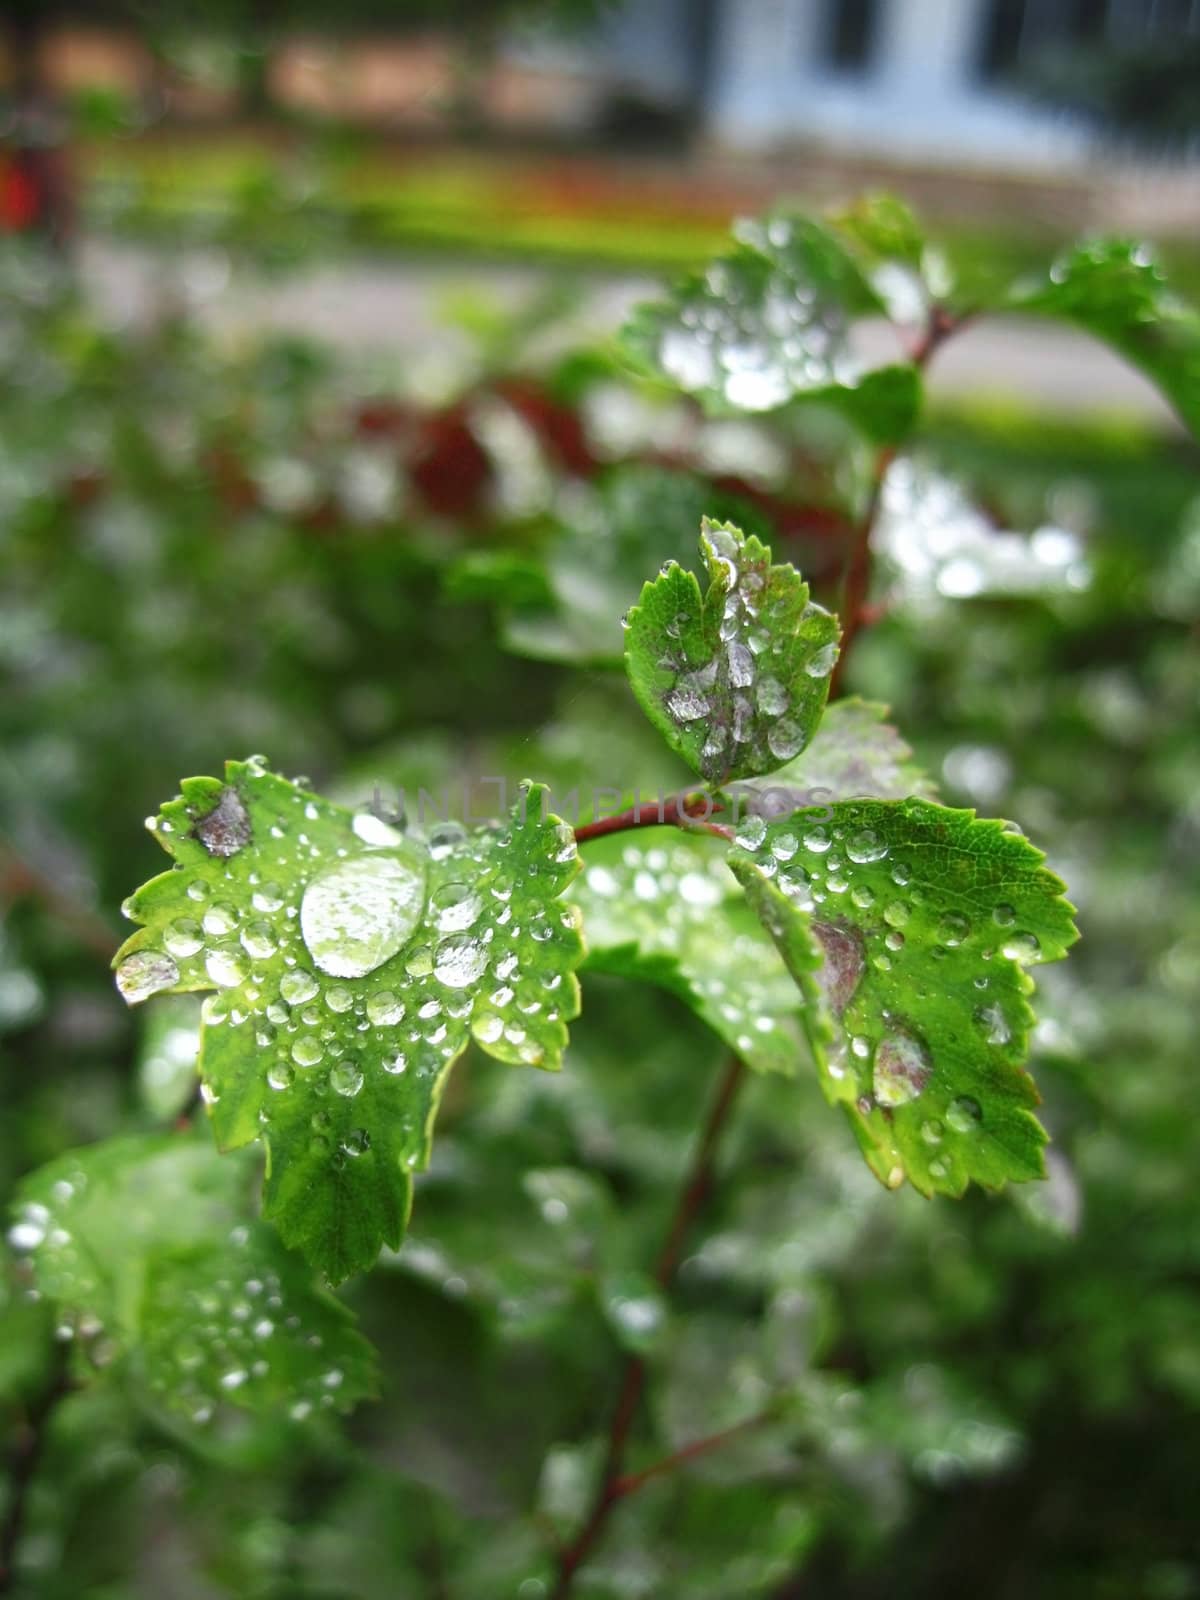 Green plant growth and dew over after rain